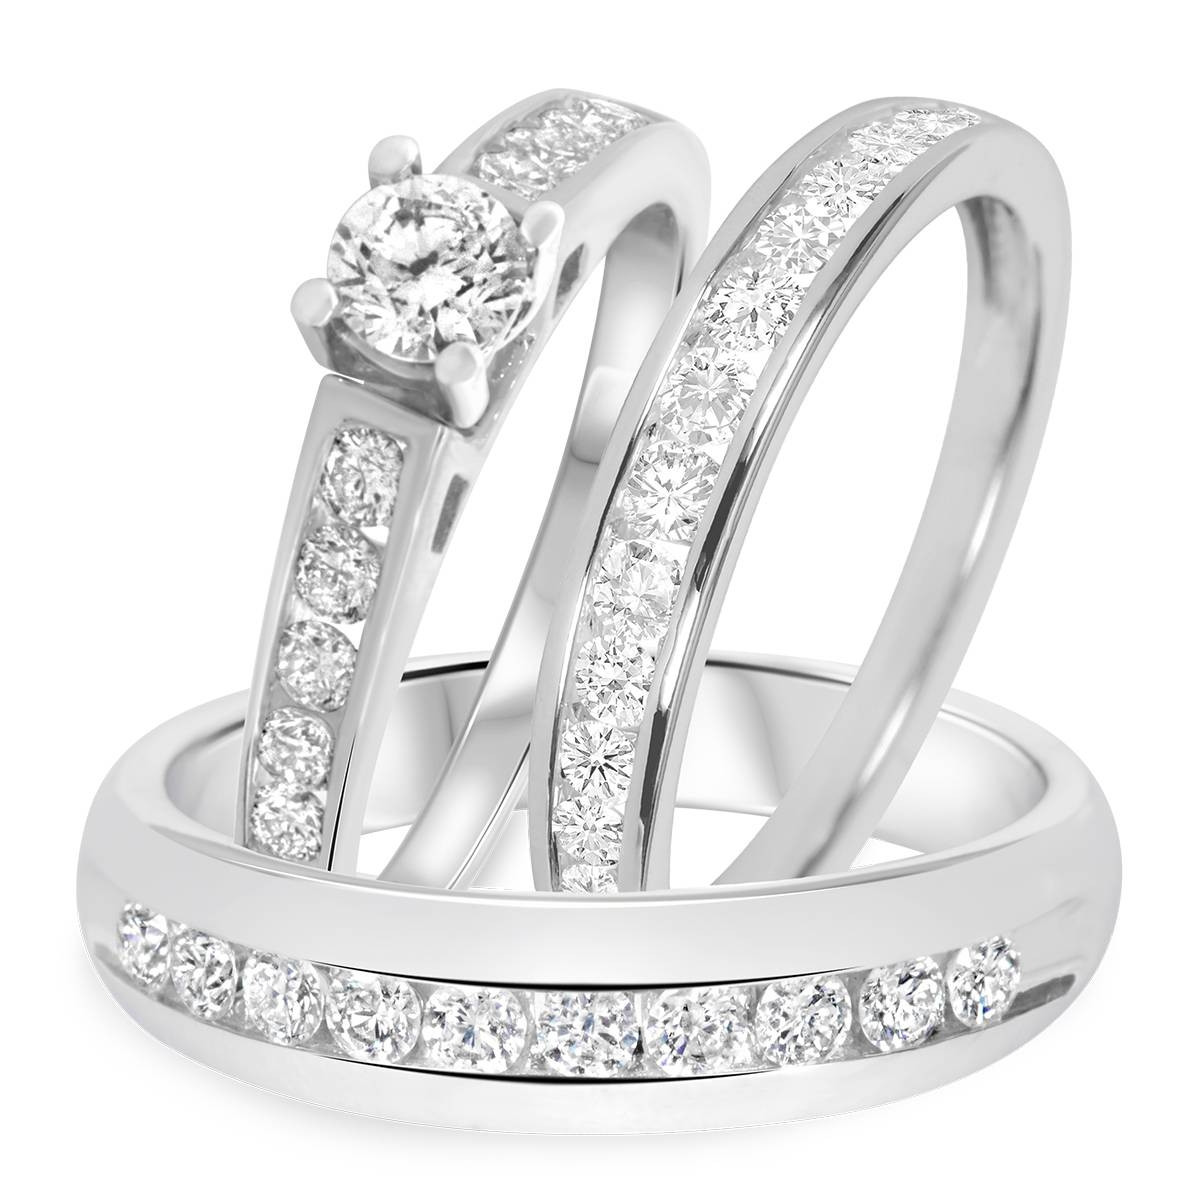 Cheap Wedding Ring Sets His And Hers
 15 Inspirations of Cheap Wedding Bands Sets His And Hers